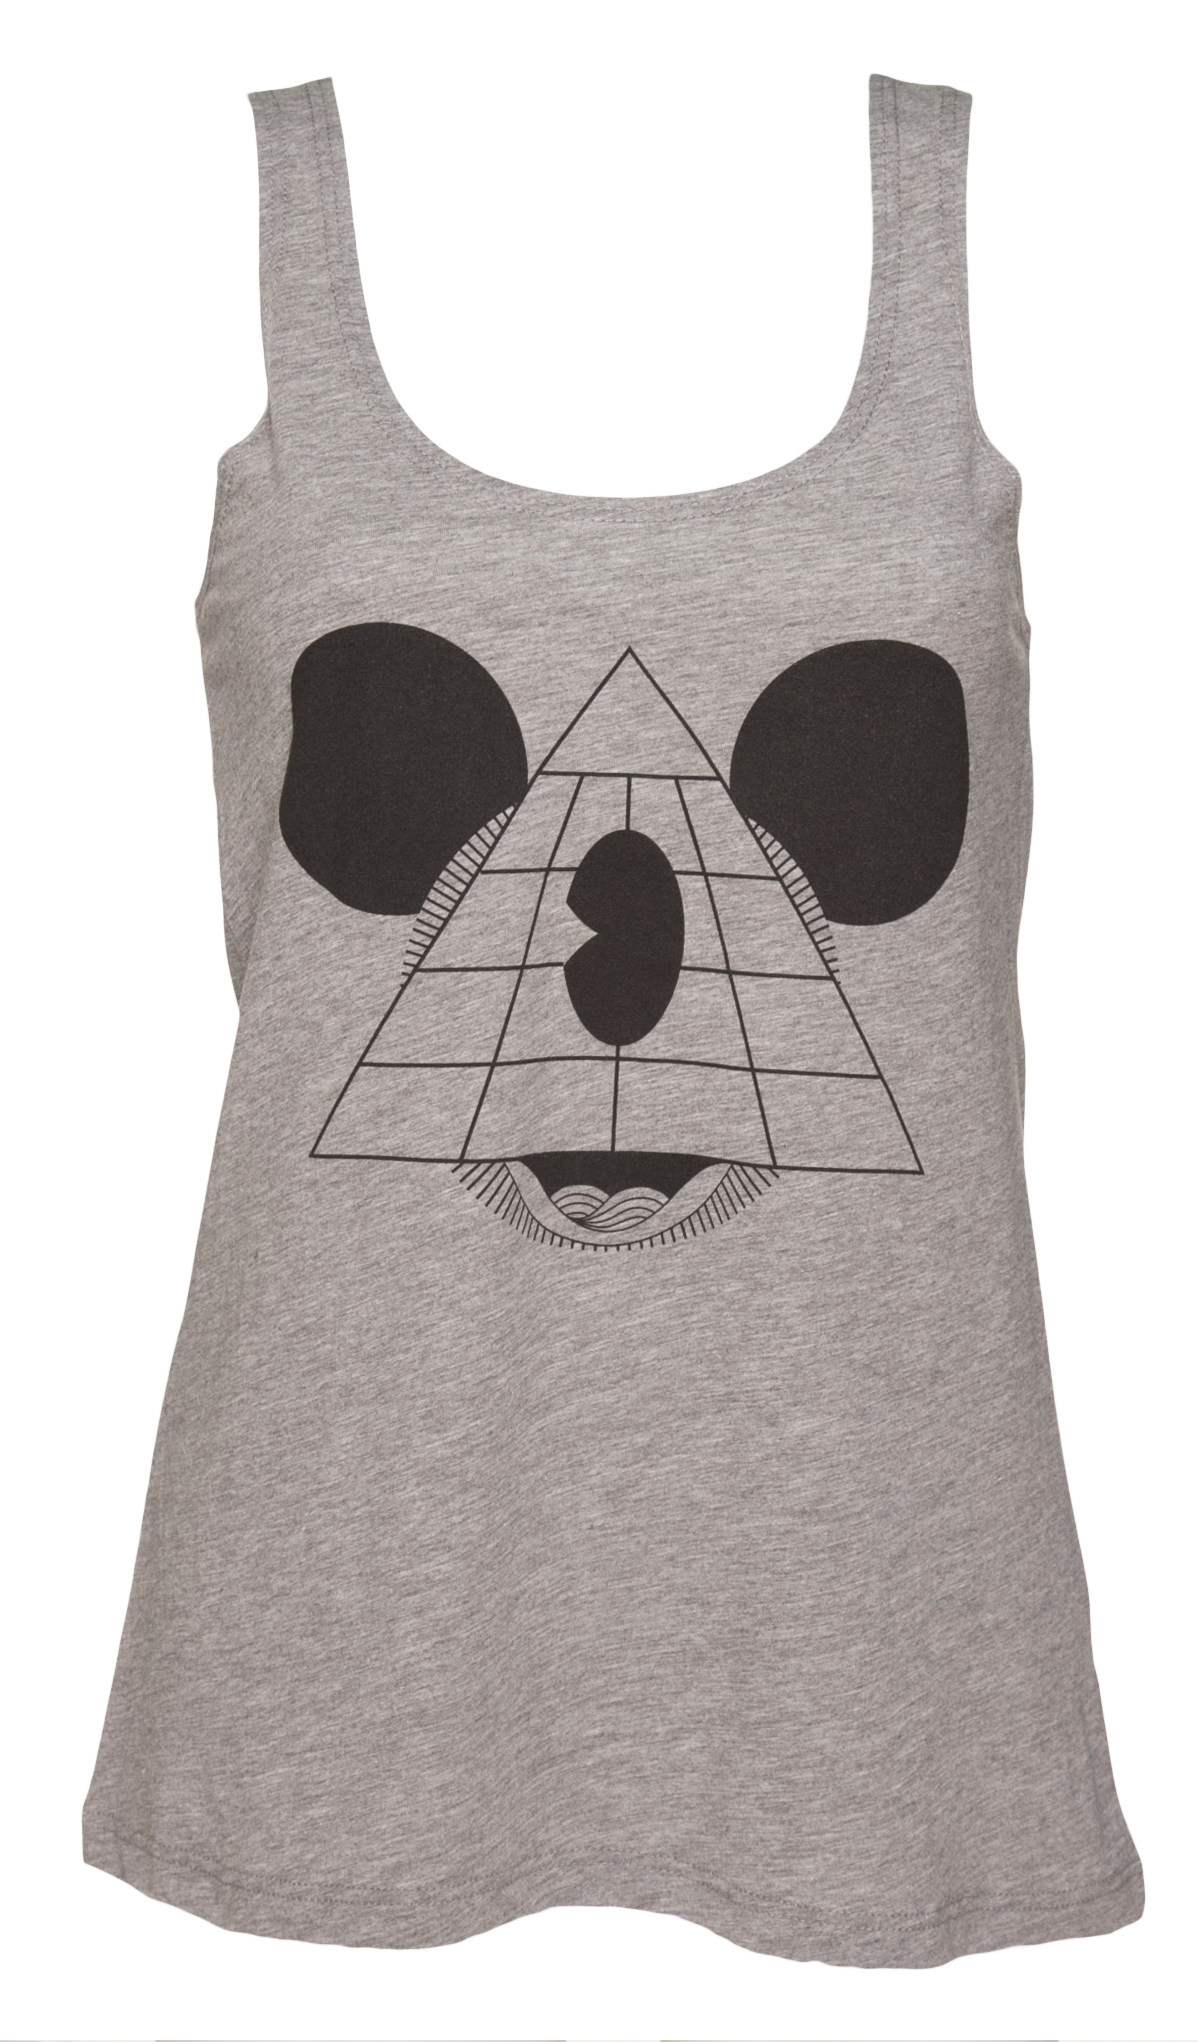 Ladies Grey Marl Mouse Pyramid Swing Vest from